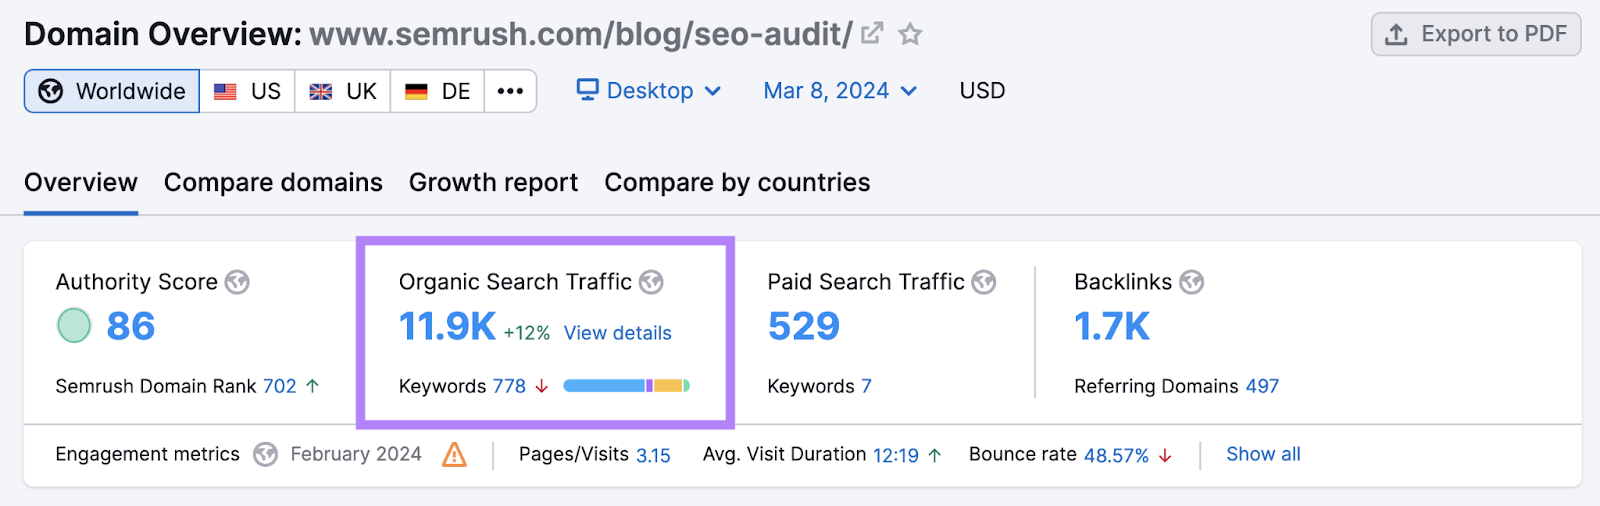 Semrush blog post on SEO audits gets 11.9K organic visitors, according to Domain Overview tool